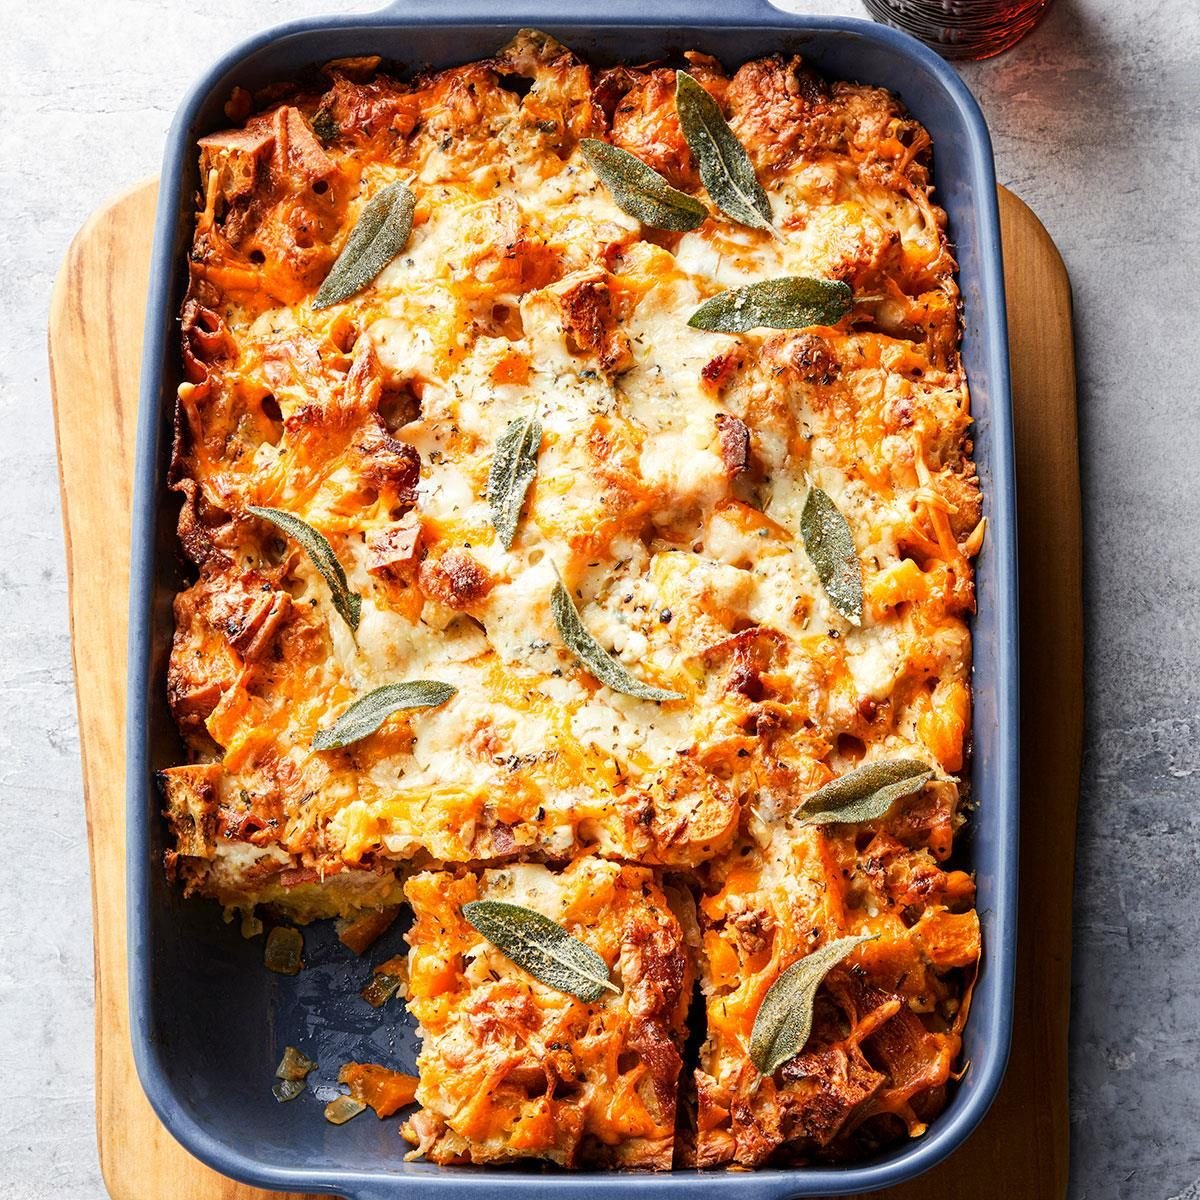 Overnight Butternut And Bacon Strata Exps Tohon24 274982 Dr 03 26 2b